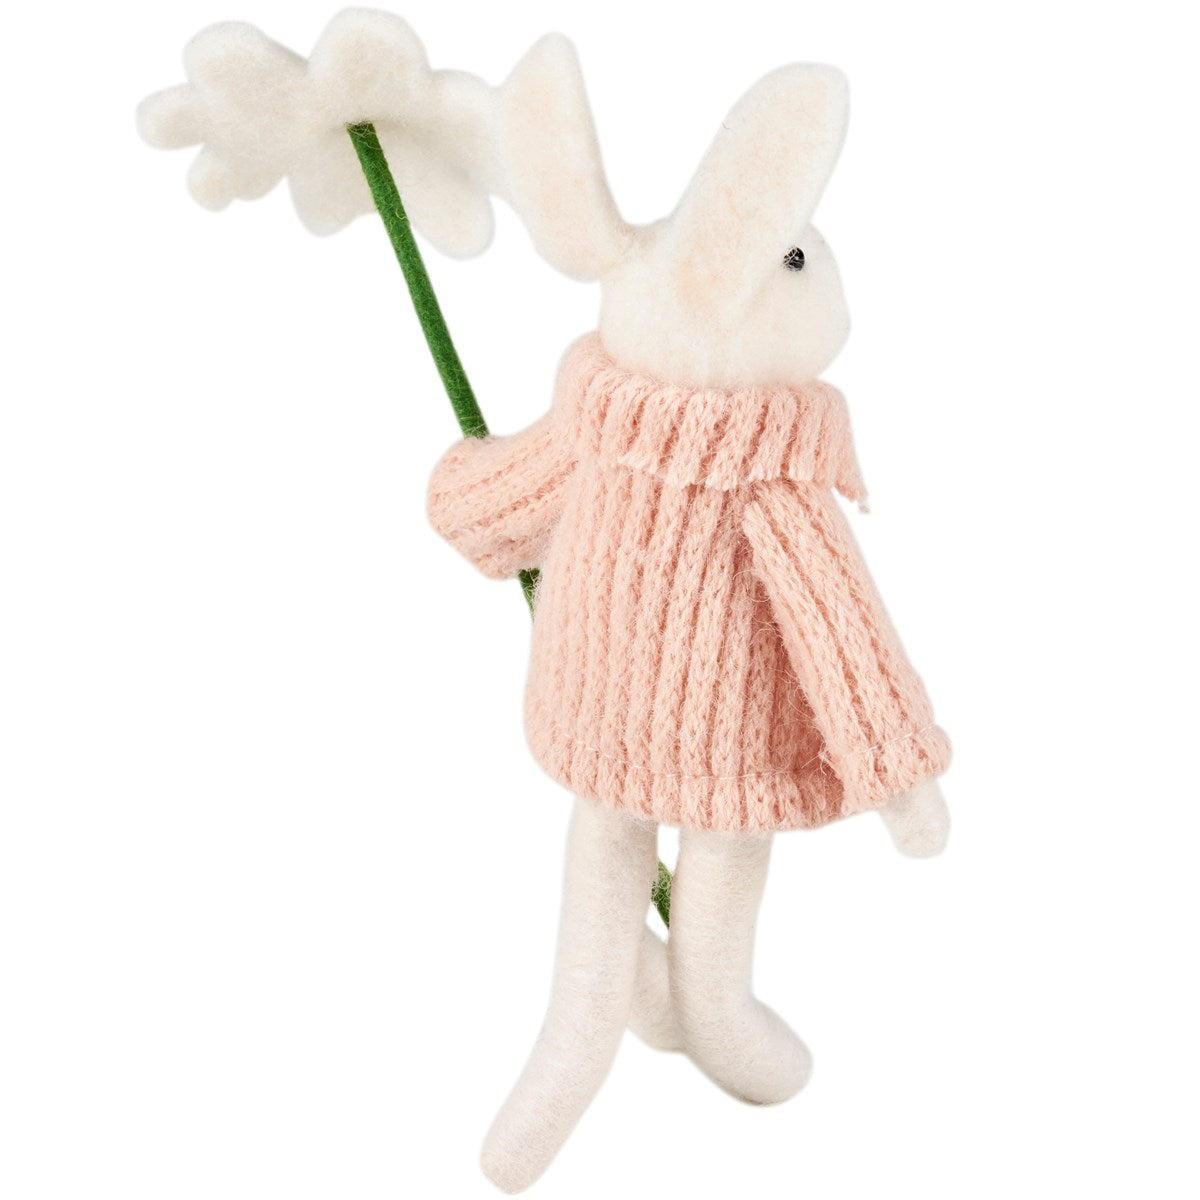 Daisy Bunny In Pink Sweater Fabric Figure 8.25" H